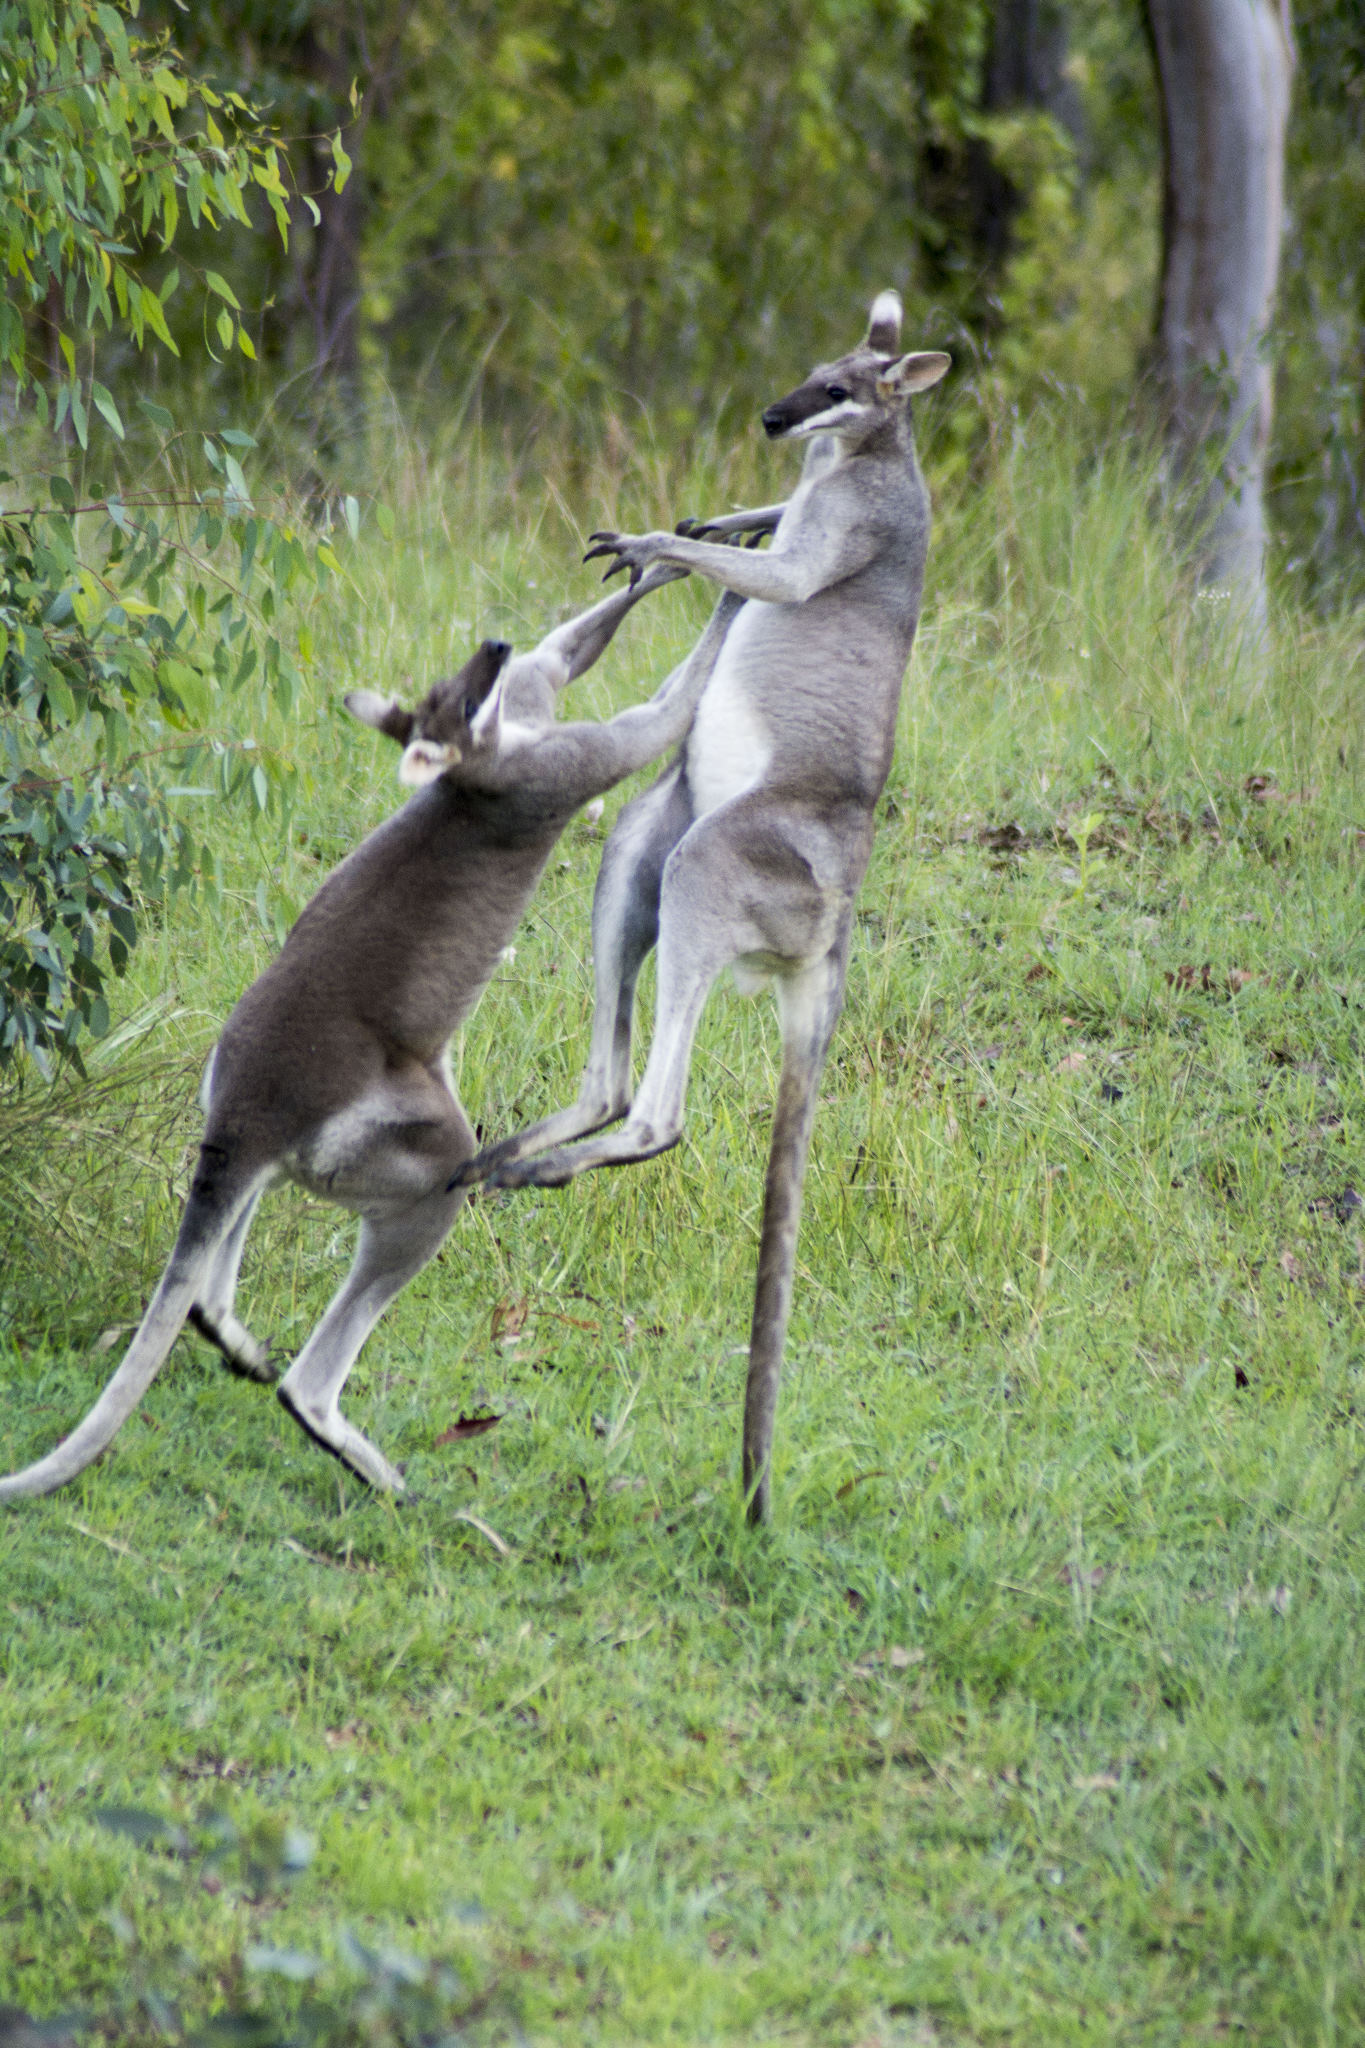 Pretty Faced Wallabies fighting